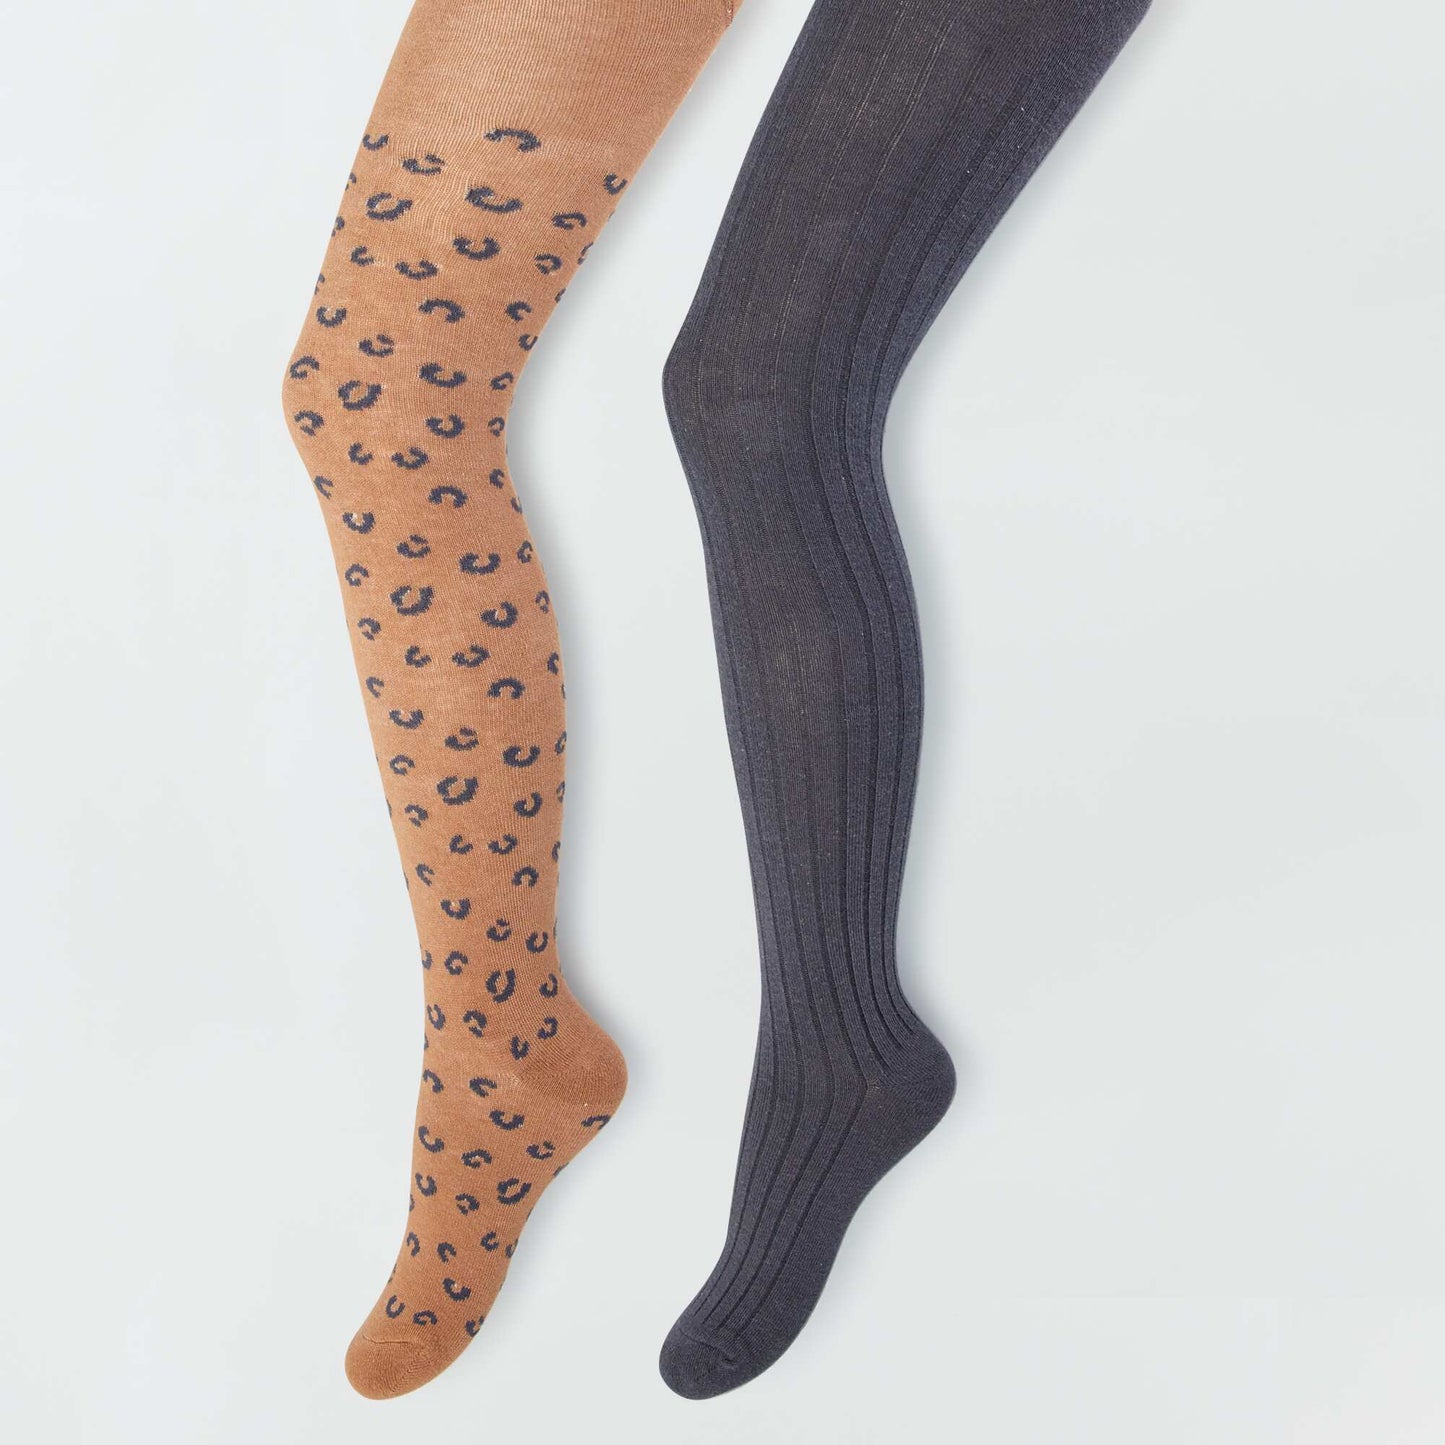 Warm tights with stylish print - Pack of 2 BROWN